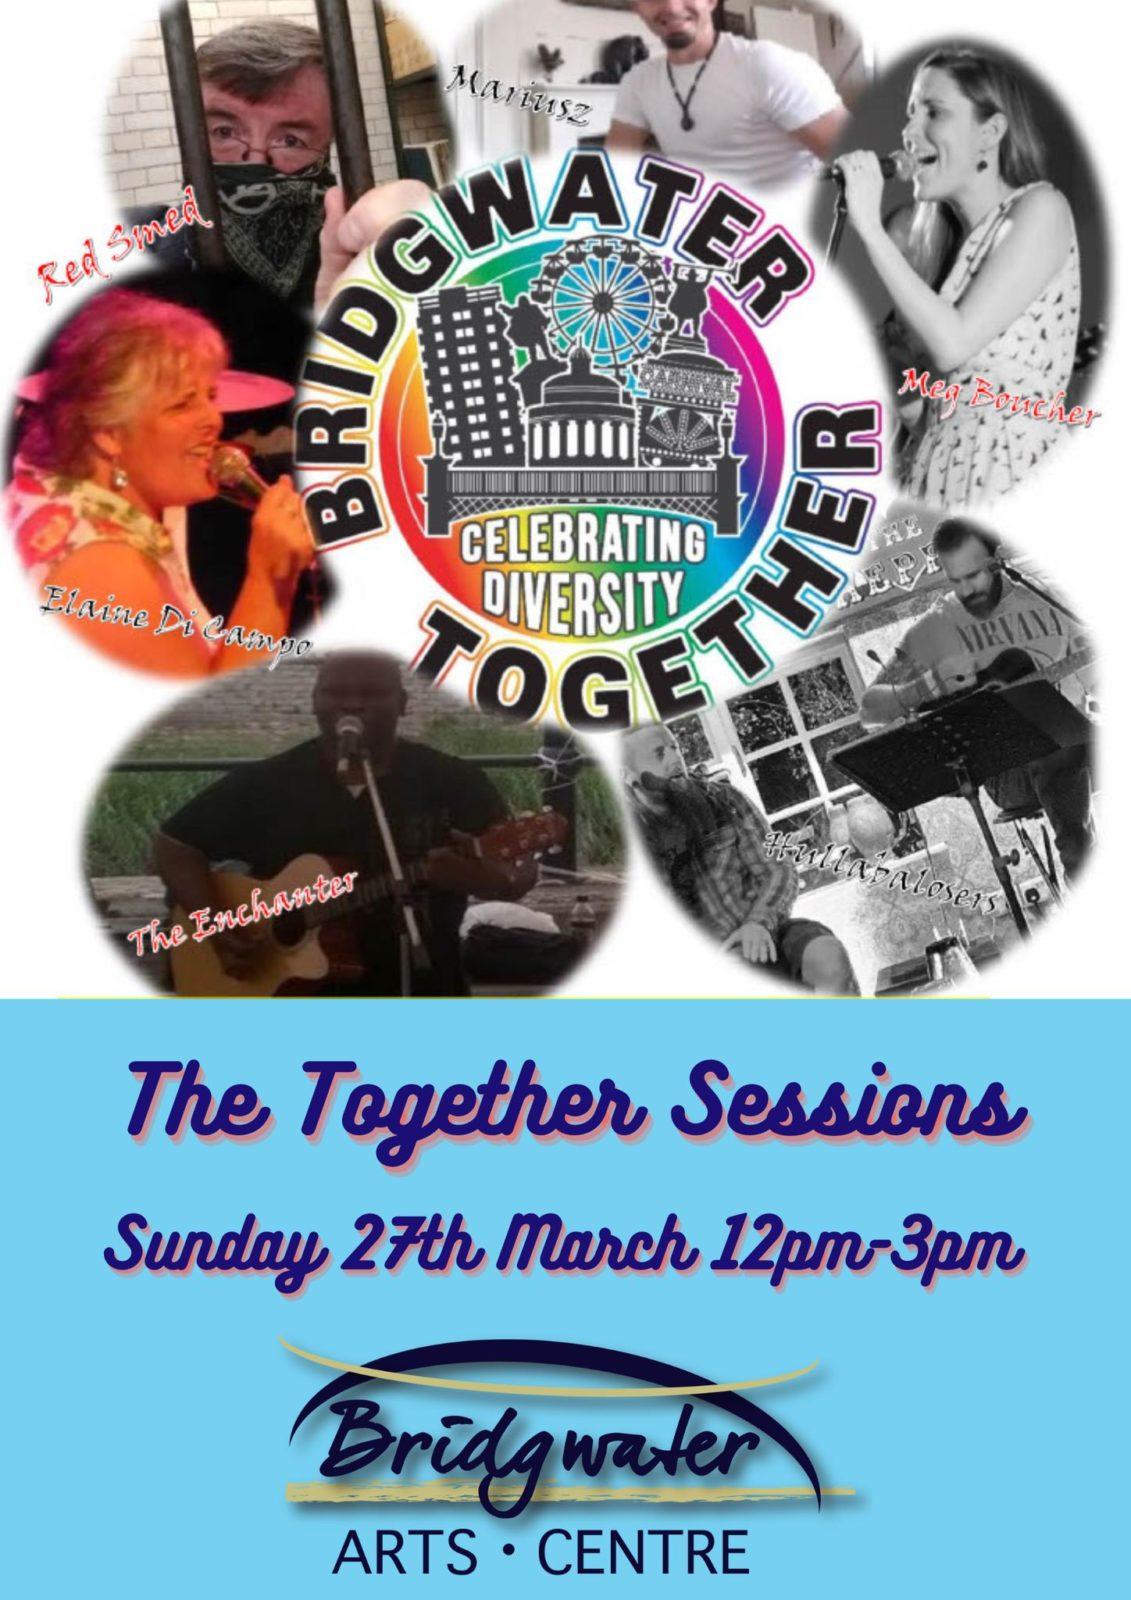 The Together sessions